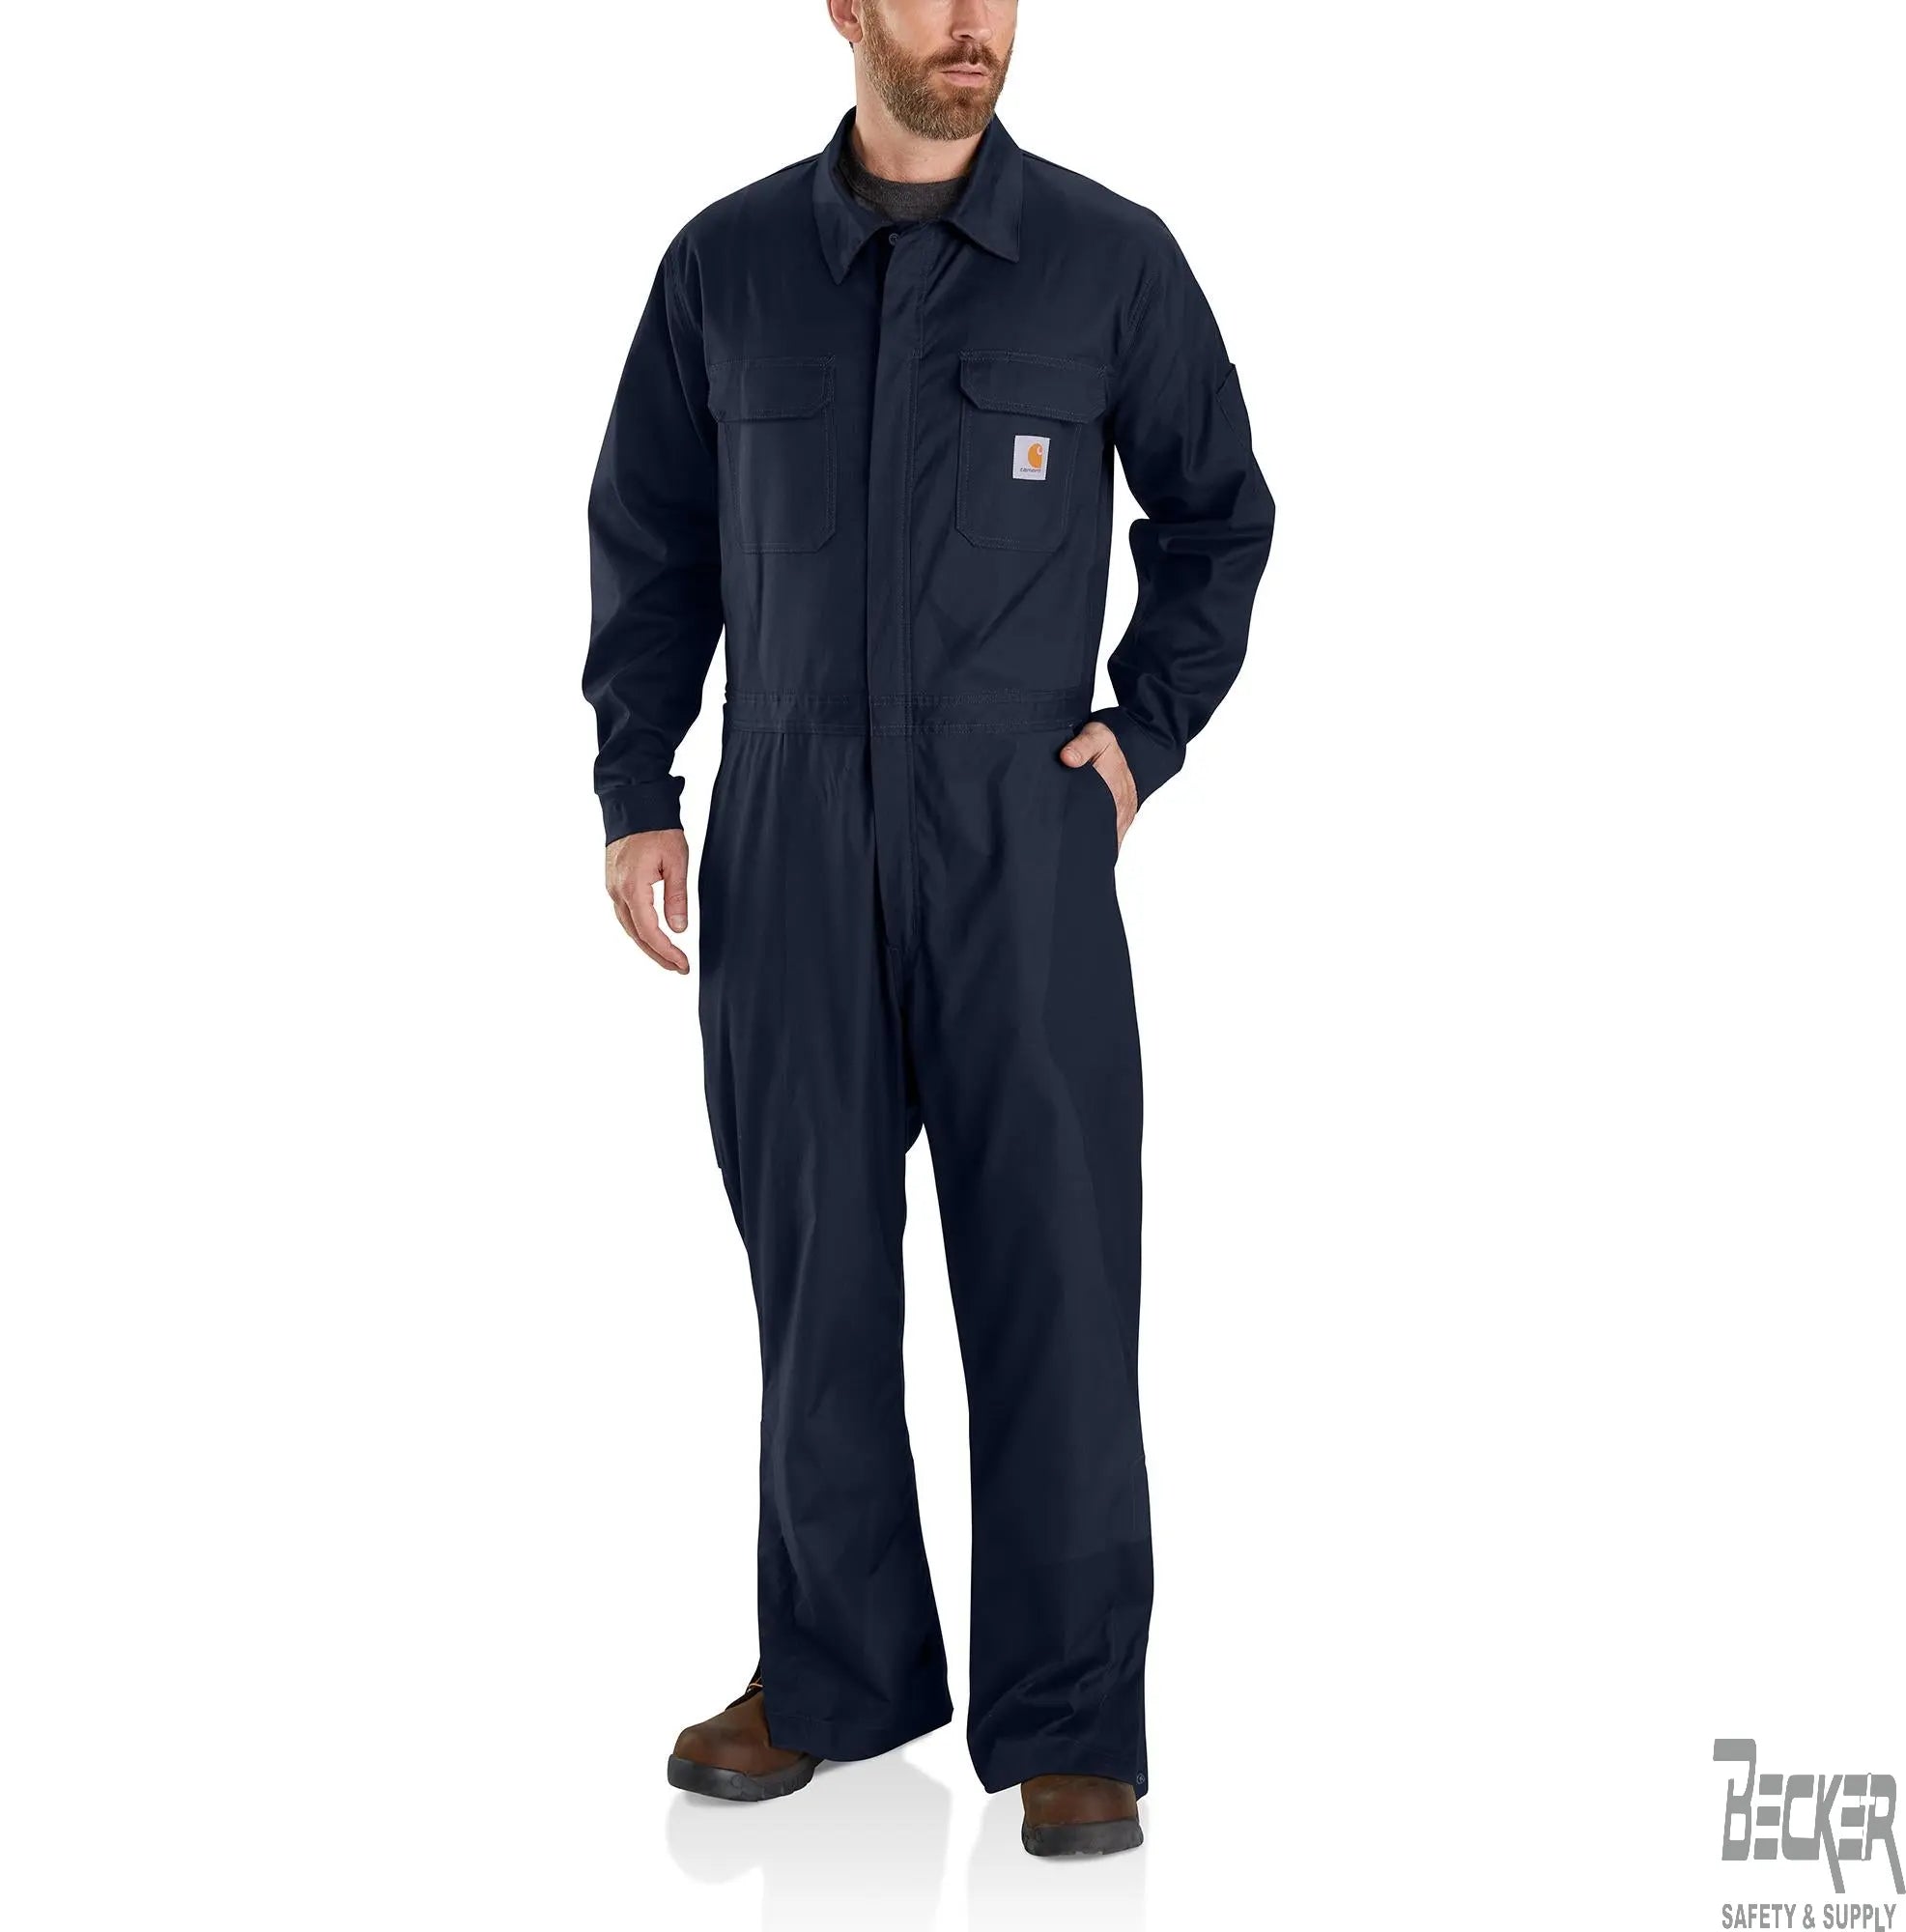 CARHARTT - Rugged Flex Canvas Coverall - Becker Safety and Supply